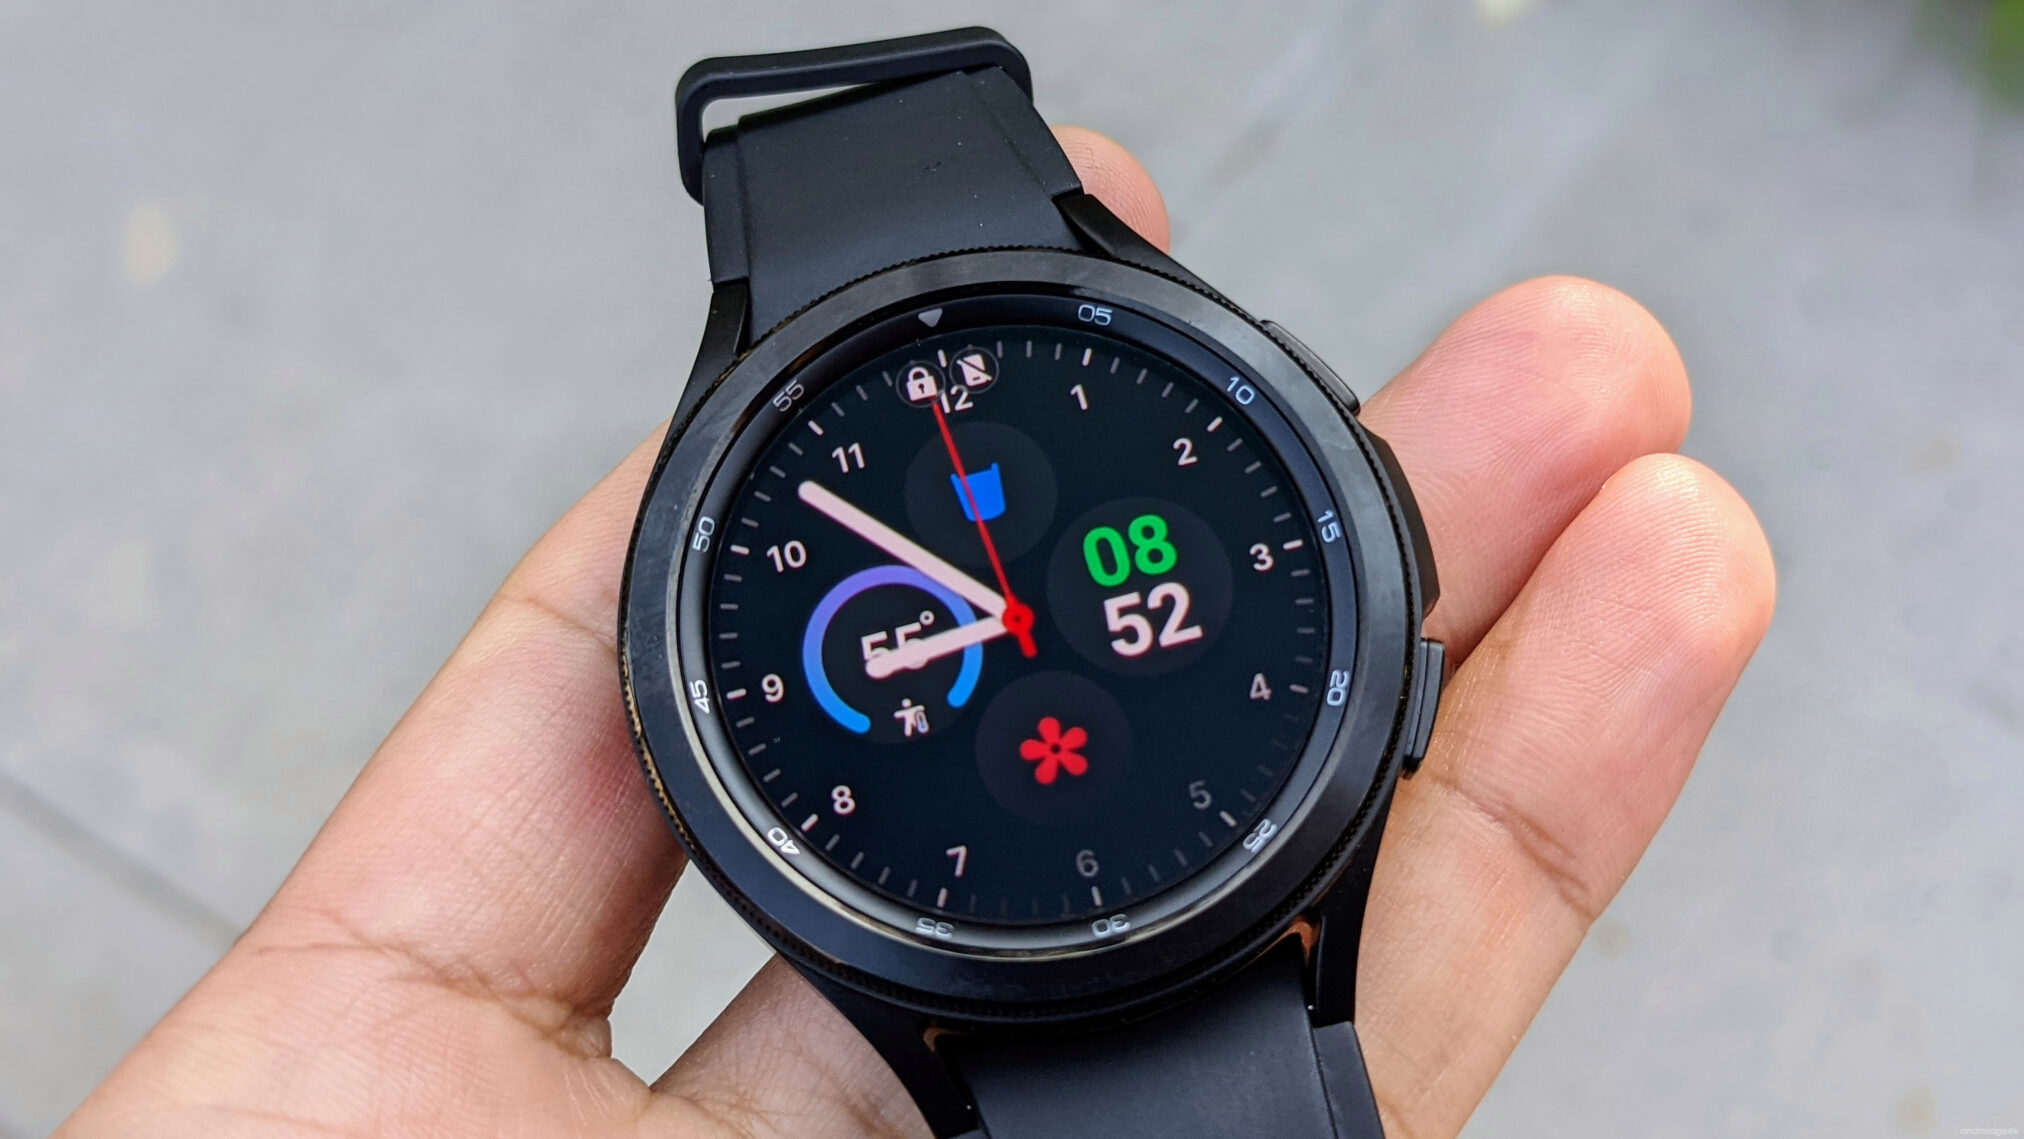 Galaxy Watch 4 and Watch 4 Classic now receive Samsung Browser for browsing

